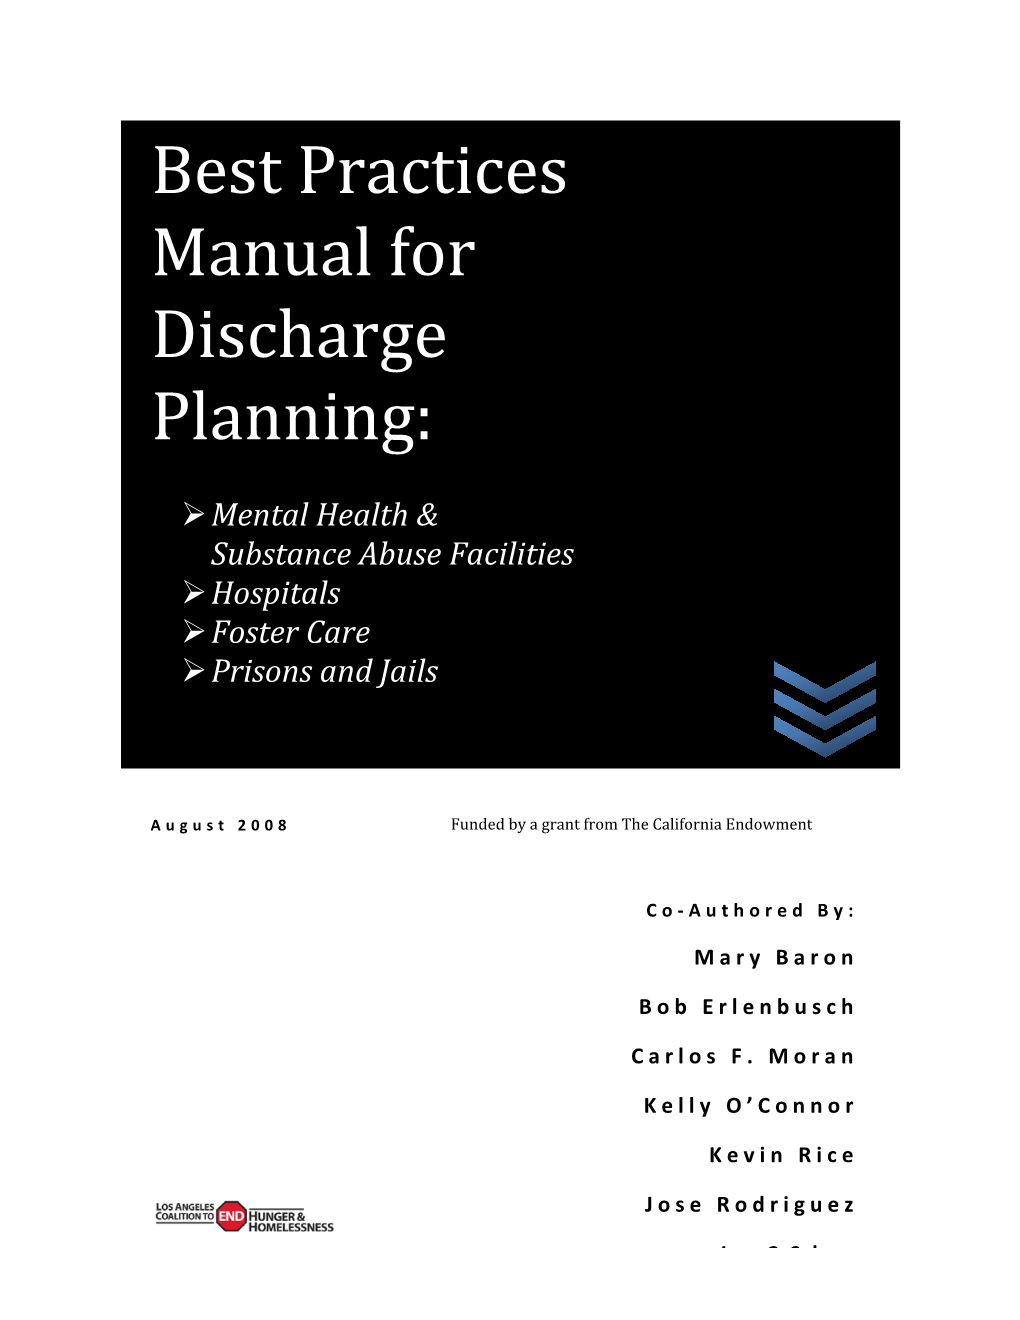 Best Practices Manual for Discharge Planning